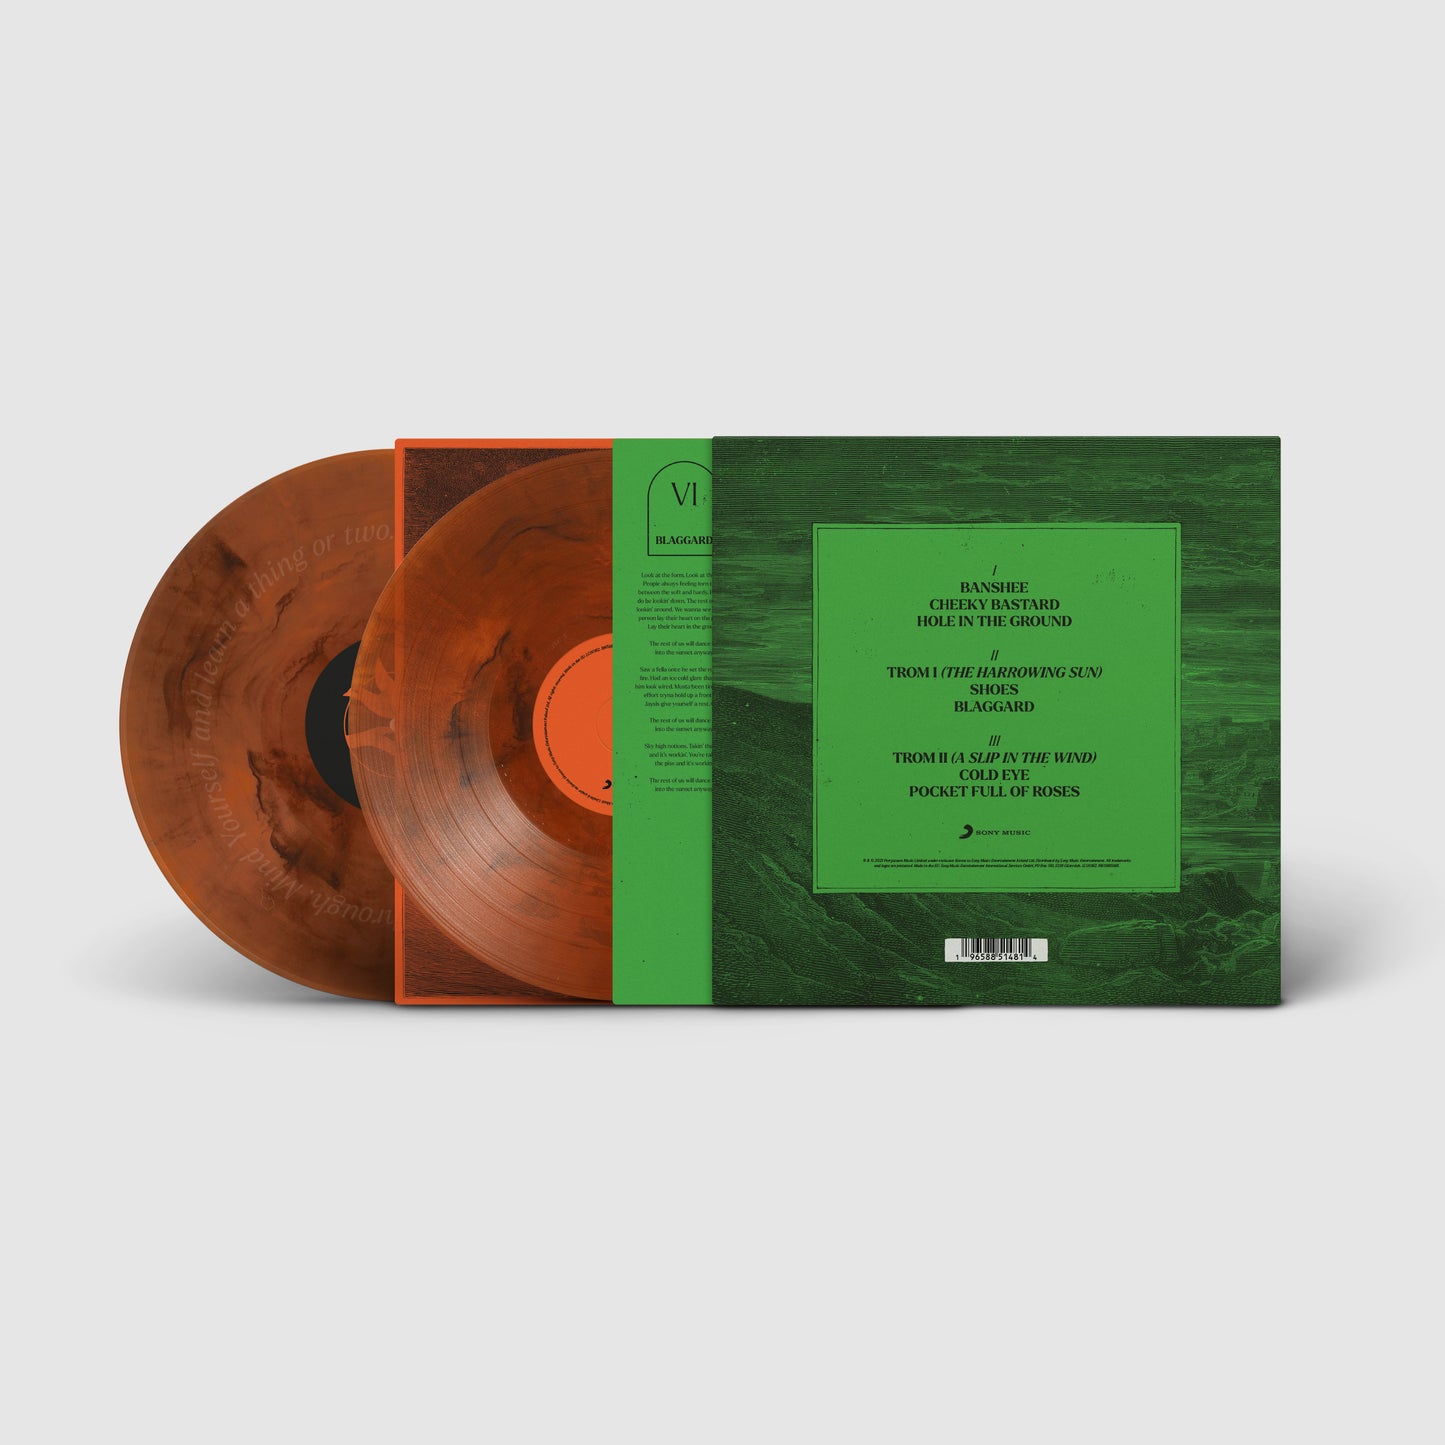 Mind Yourself (Limited Edition Deluxe Double Coloured Vinyl with etching PRE-ORDER)